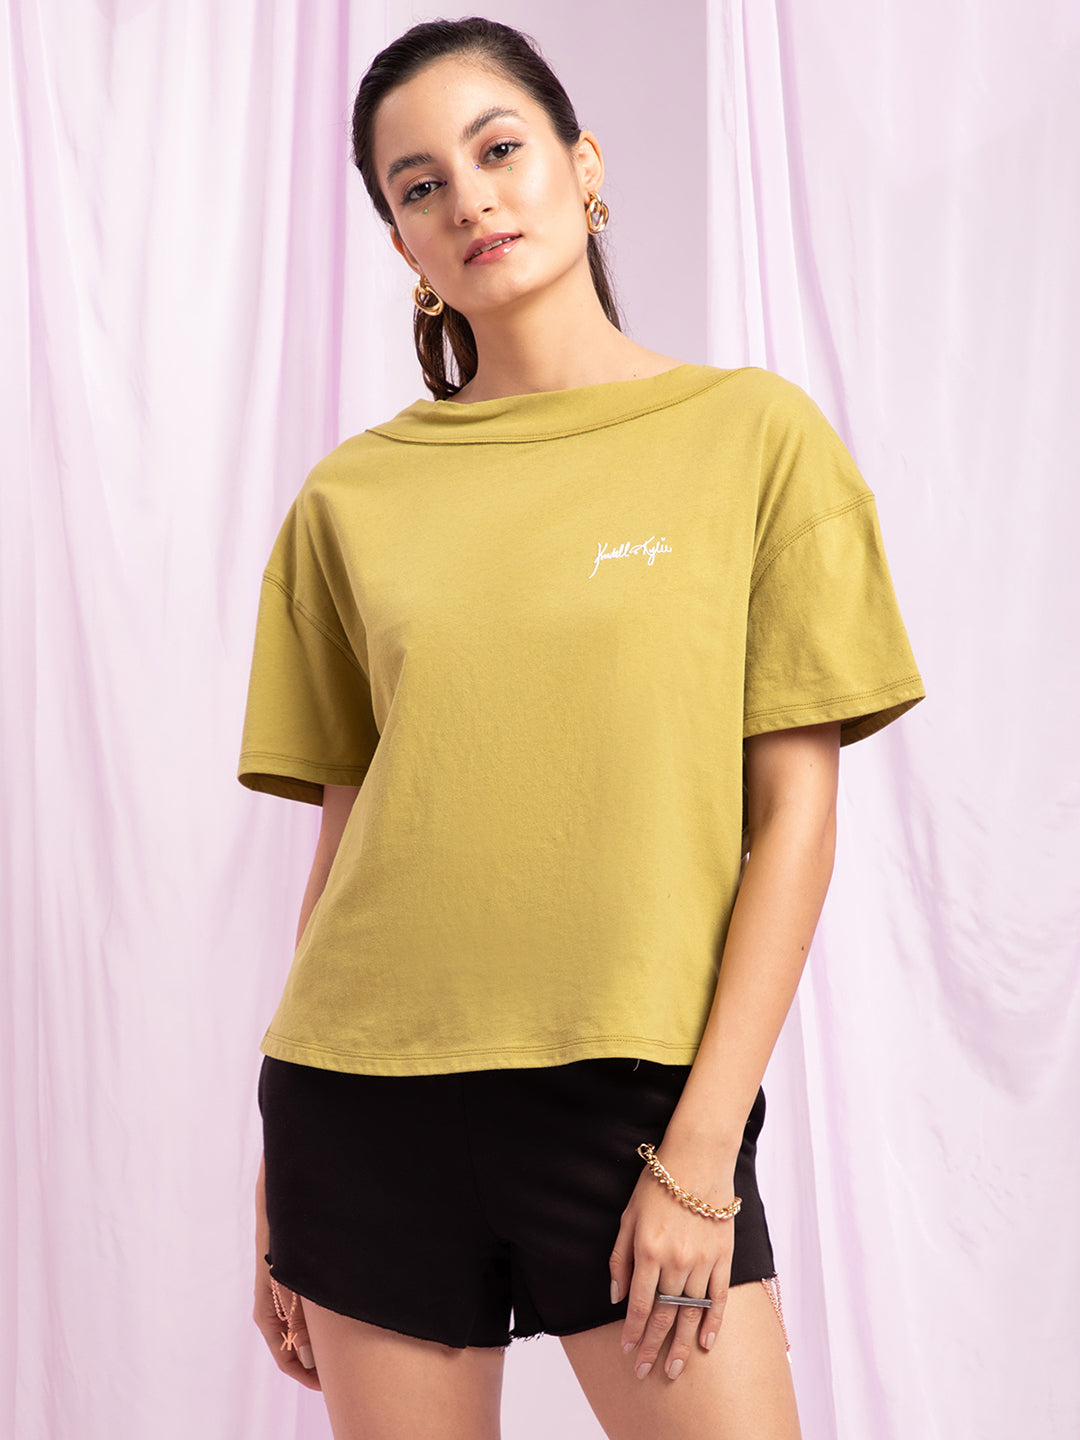 Kendall + Kylie Elia Green Loose Fit T-Shirt